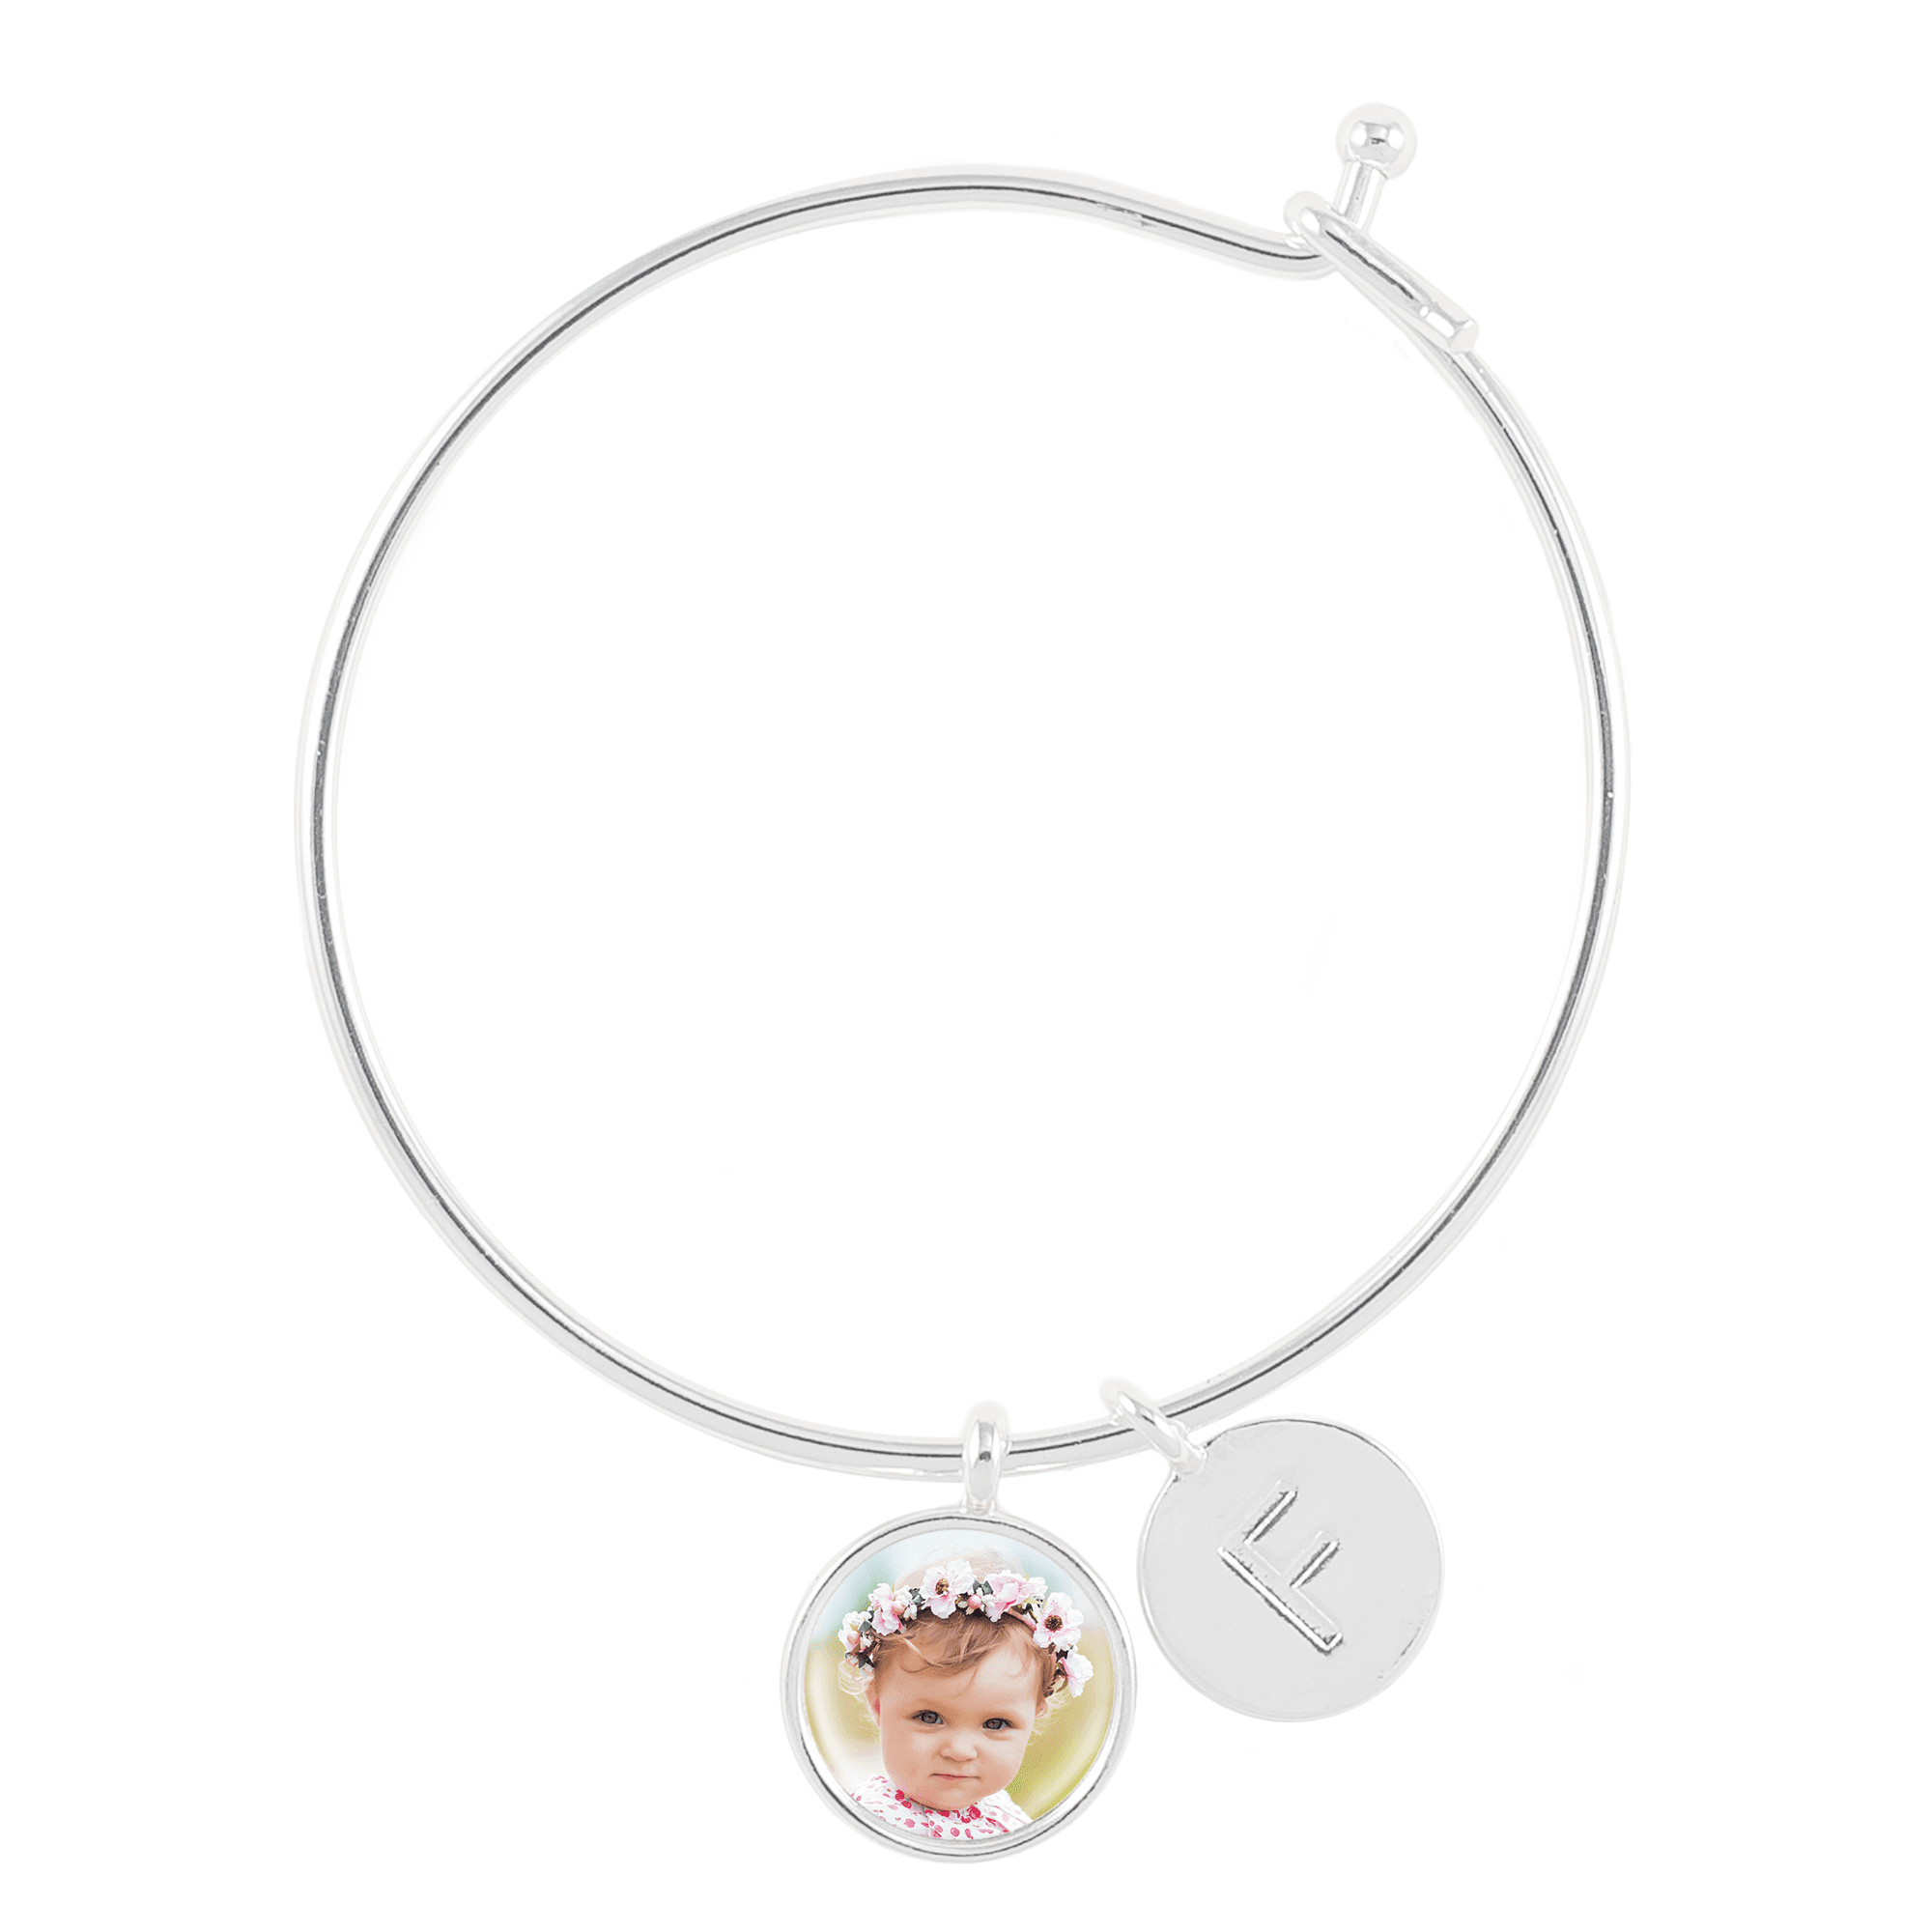 Bangle Bracelet with Photo Charm and Letter Charm